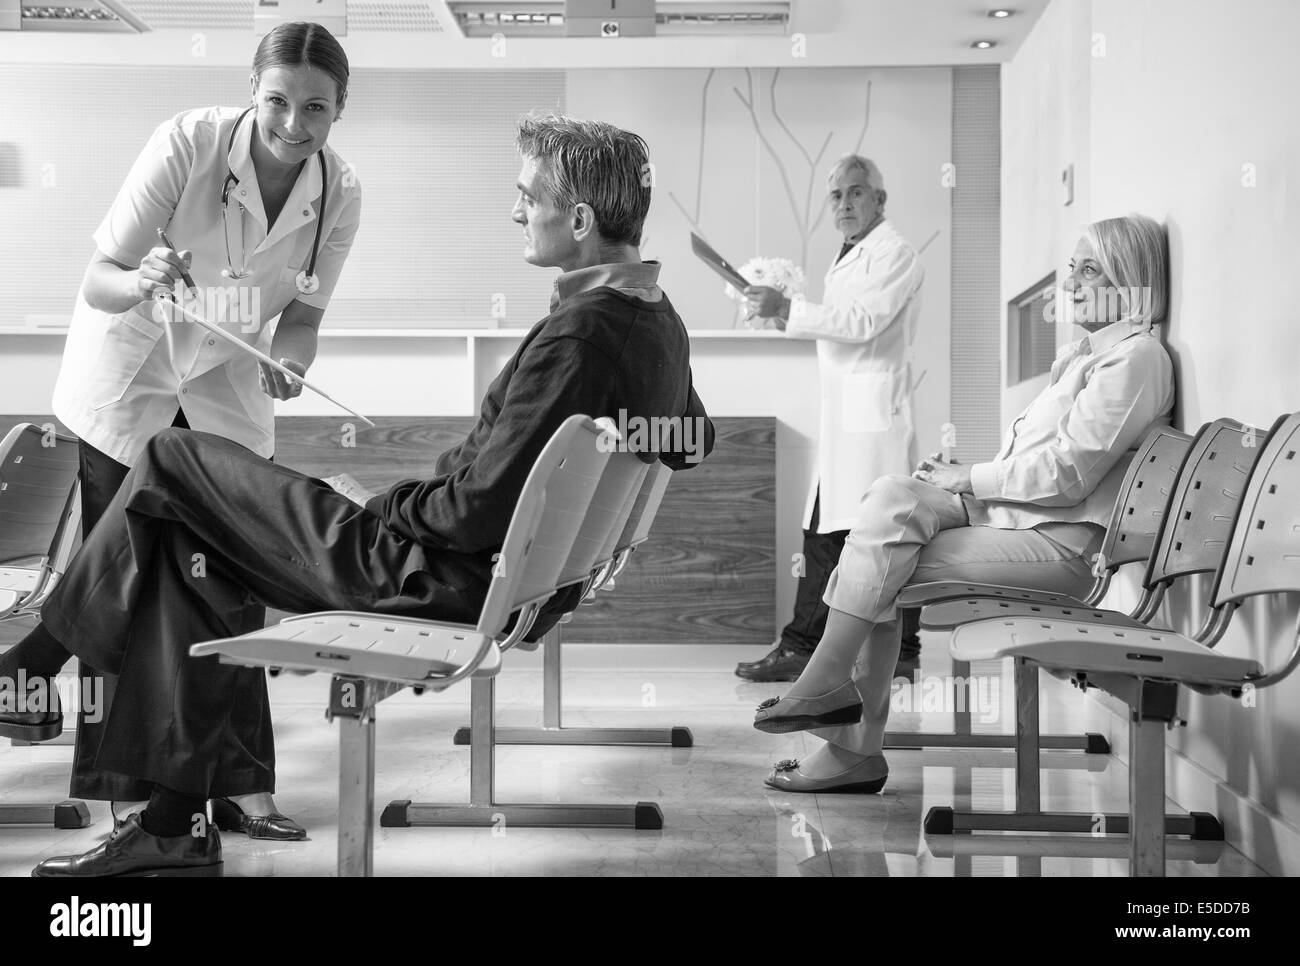 Doctors and patients in hospital waiting room. Stock Photo